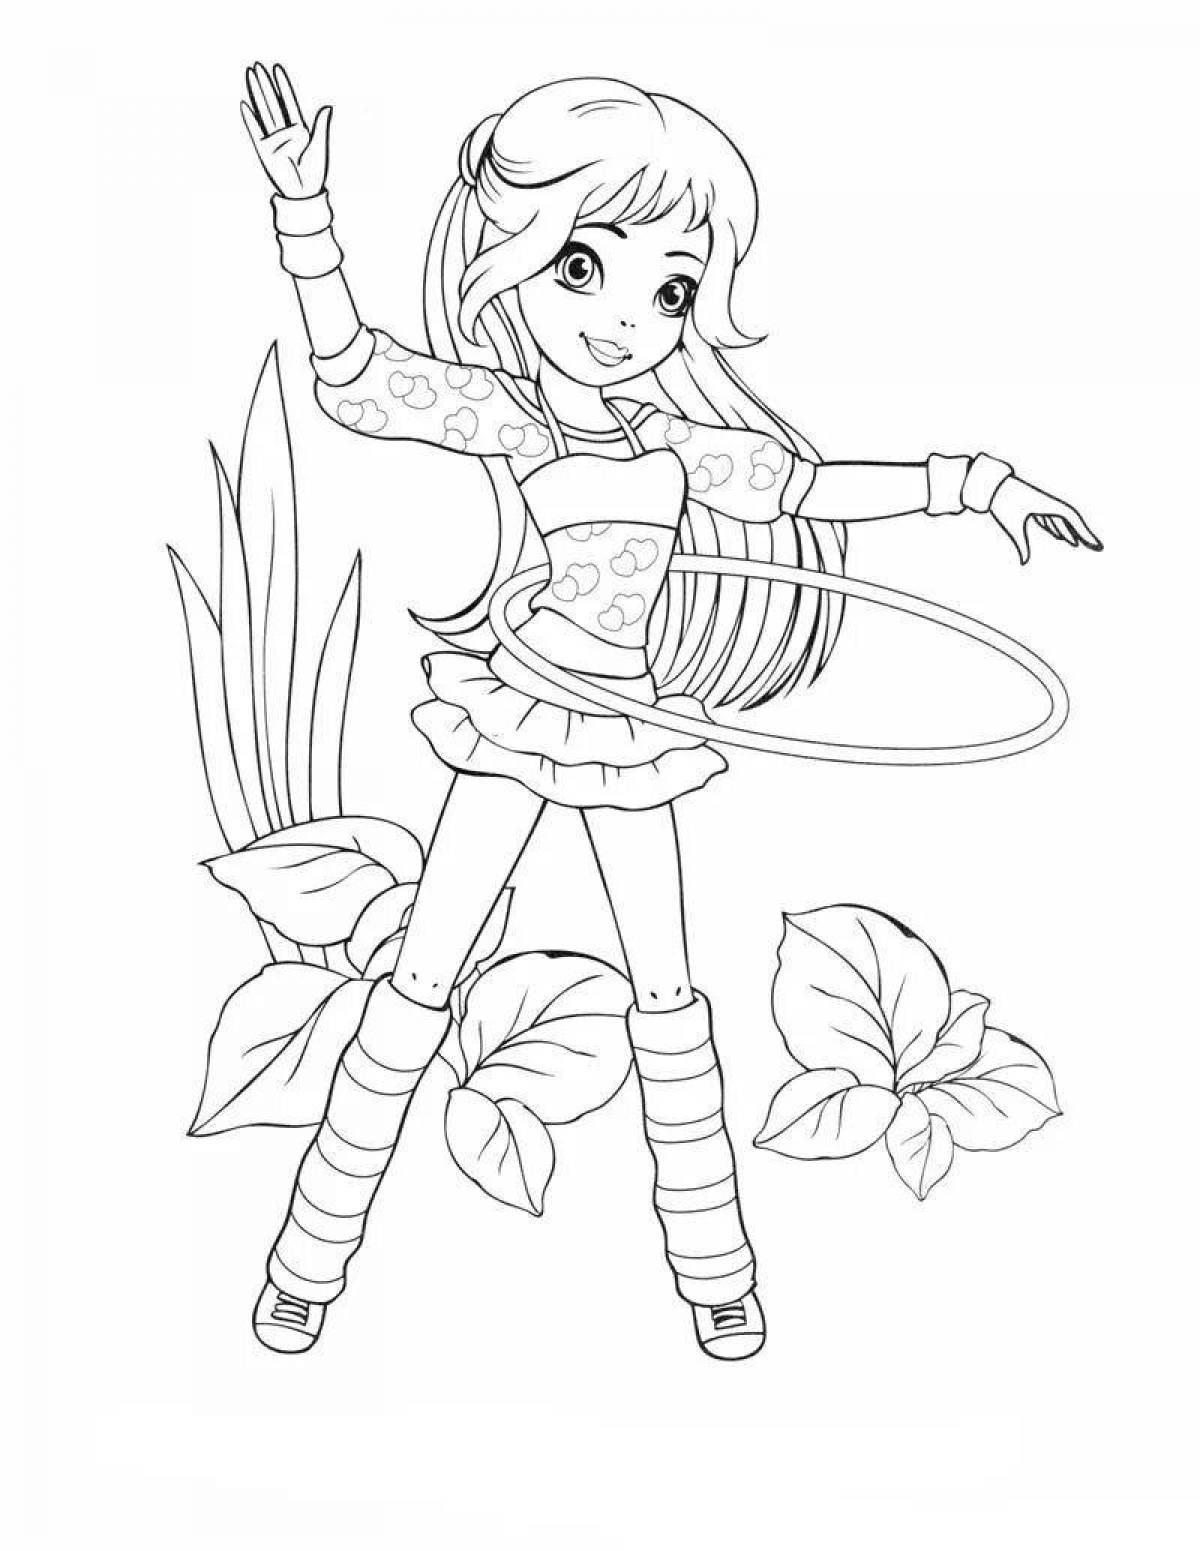 Amazing coloring pages for girls 9 10